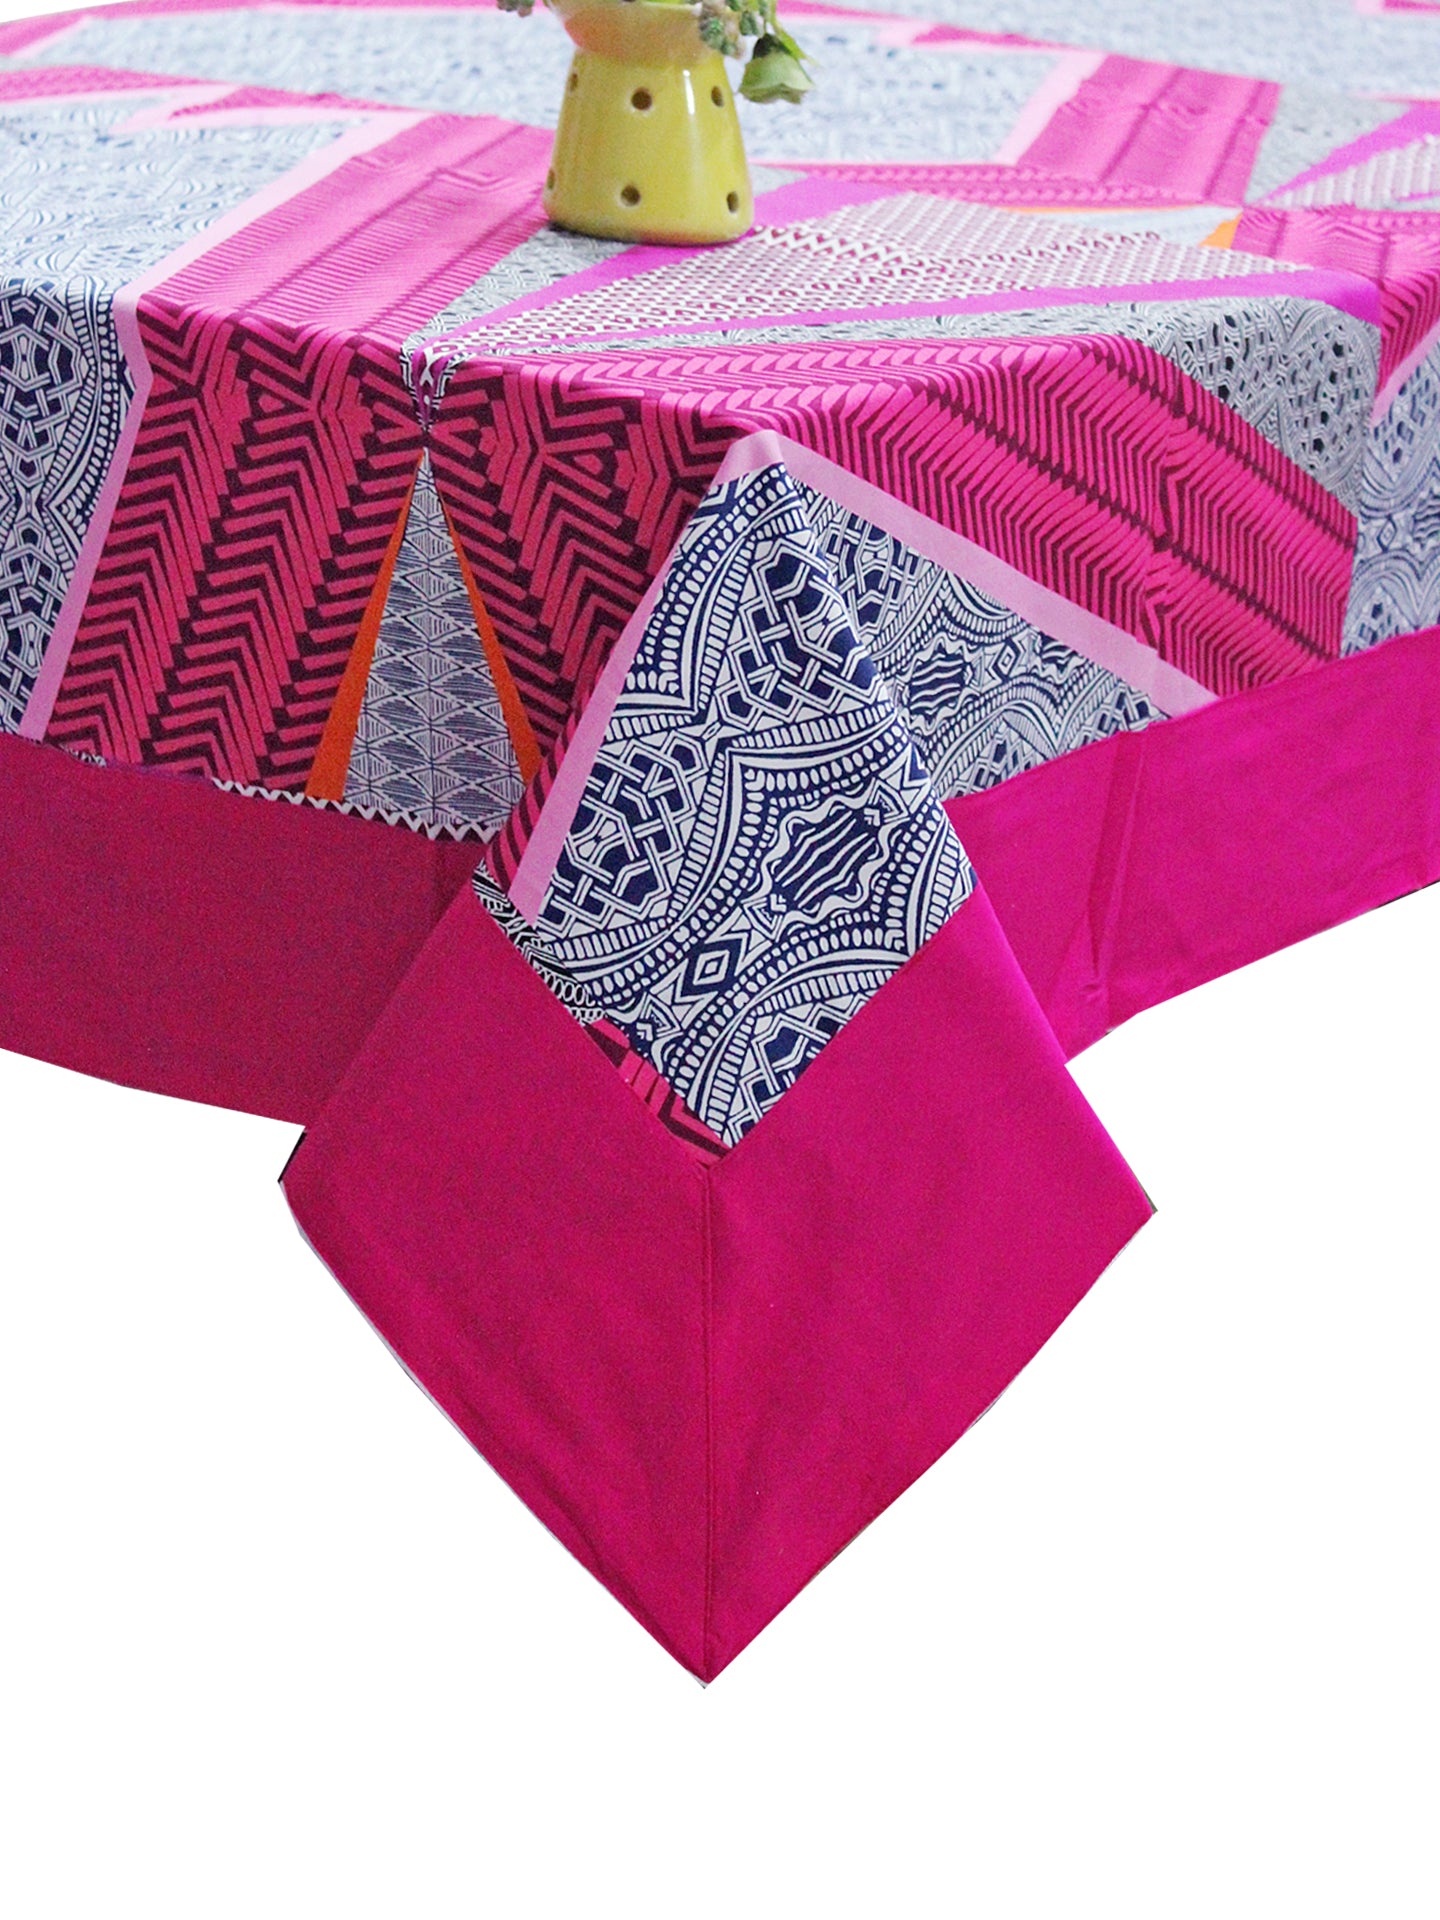 Prism Pink Printed Cotton Abstract Table Cover(1 Pc) online in India